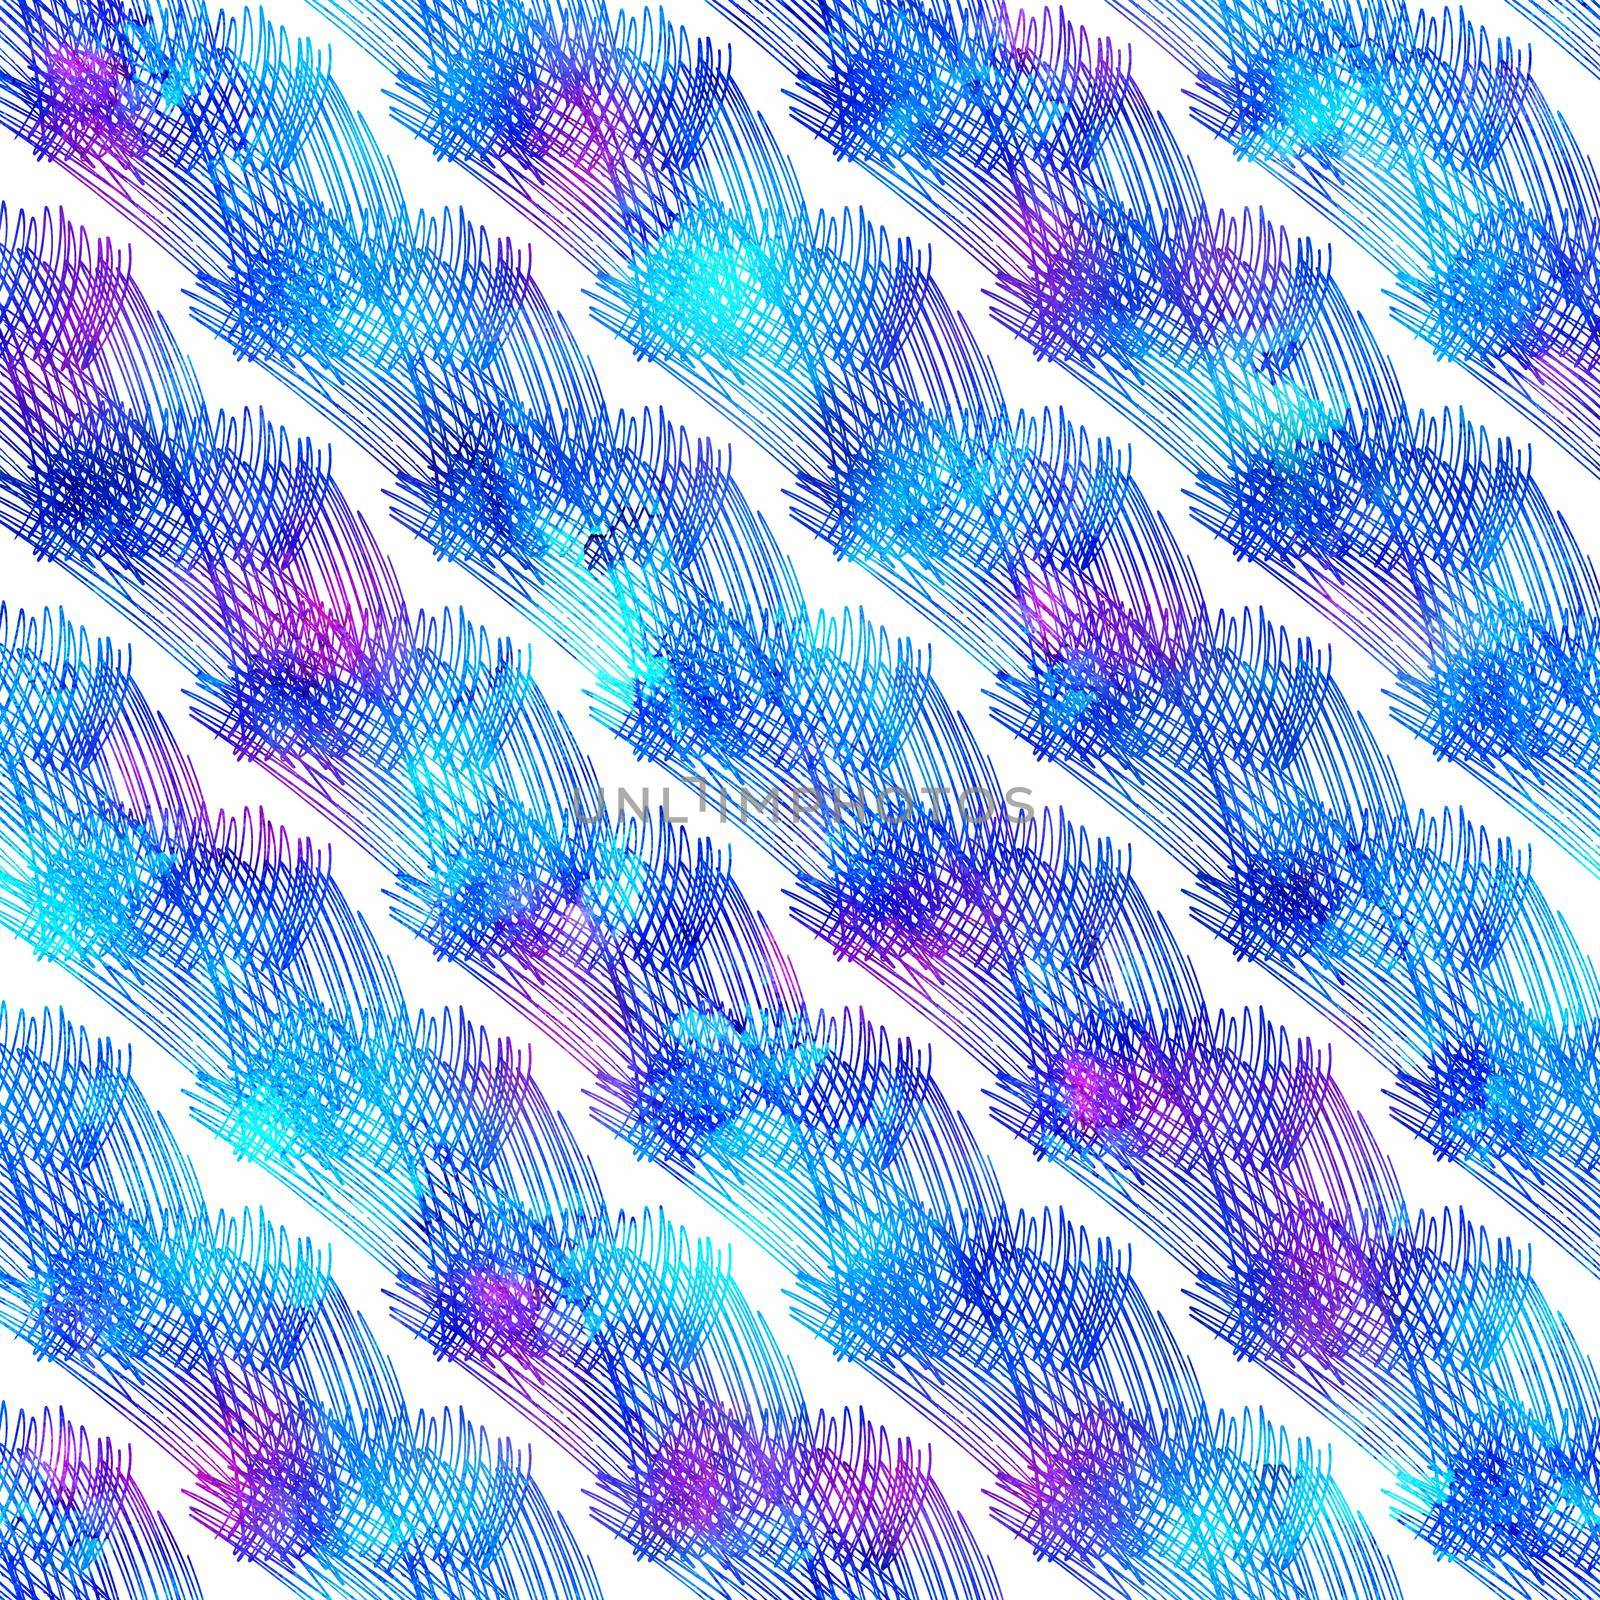 Brush Stroke Line Stripe Geometric Grung Pattern Seamless in Blue Color Background. Gunge Collage Watercolor Texture for Teen and School Kids Fabric Prints Grange Design with lines by DesignAB